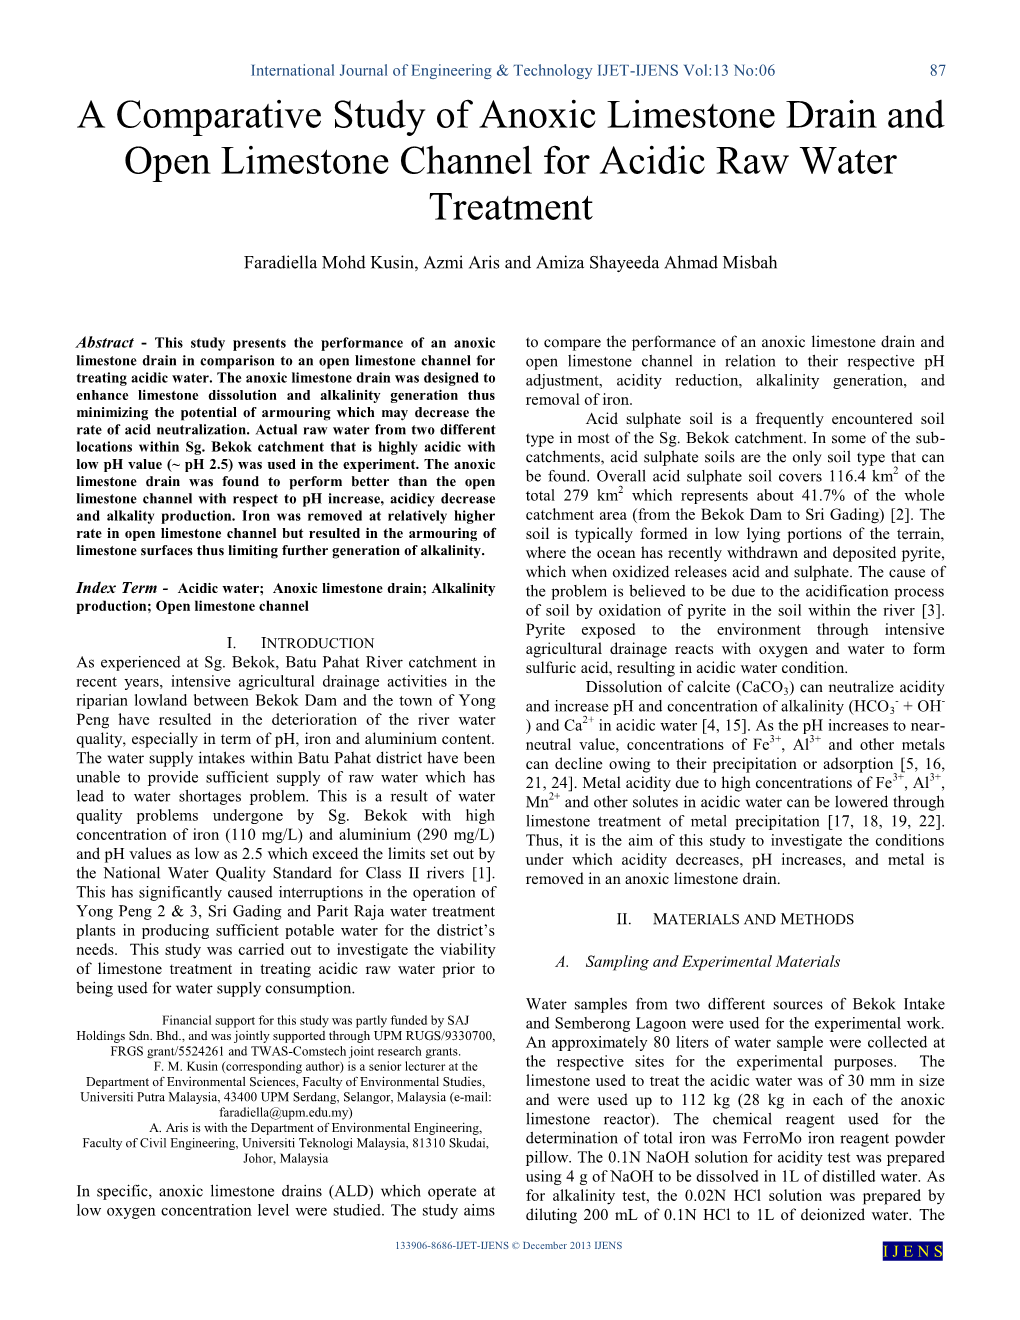 A Comparative Study of Anoxic Limestone Drain and Open Limestone Channel for Acidic Raw Water Treatment